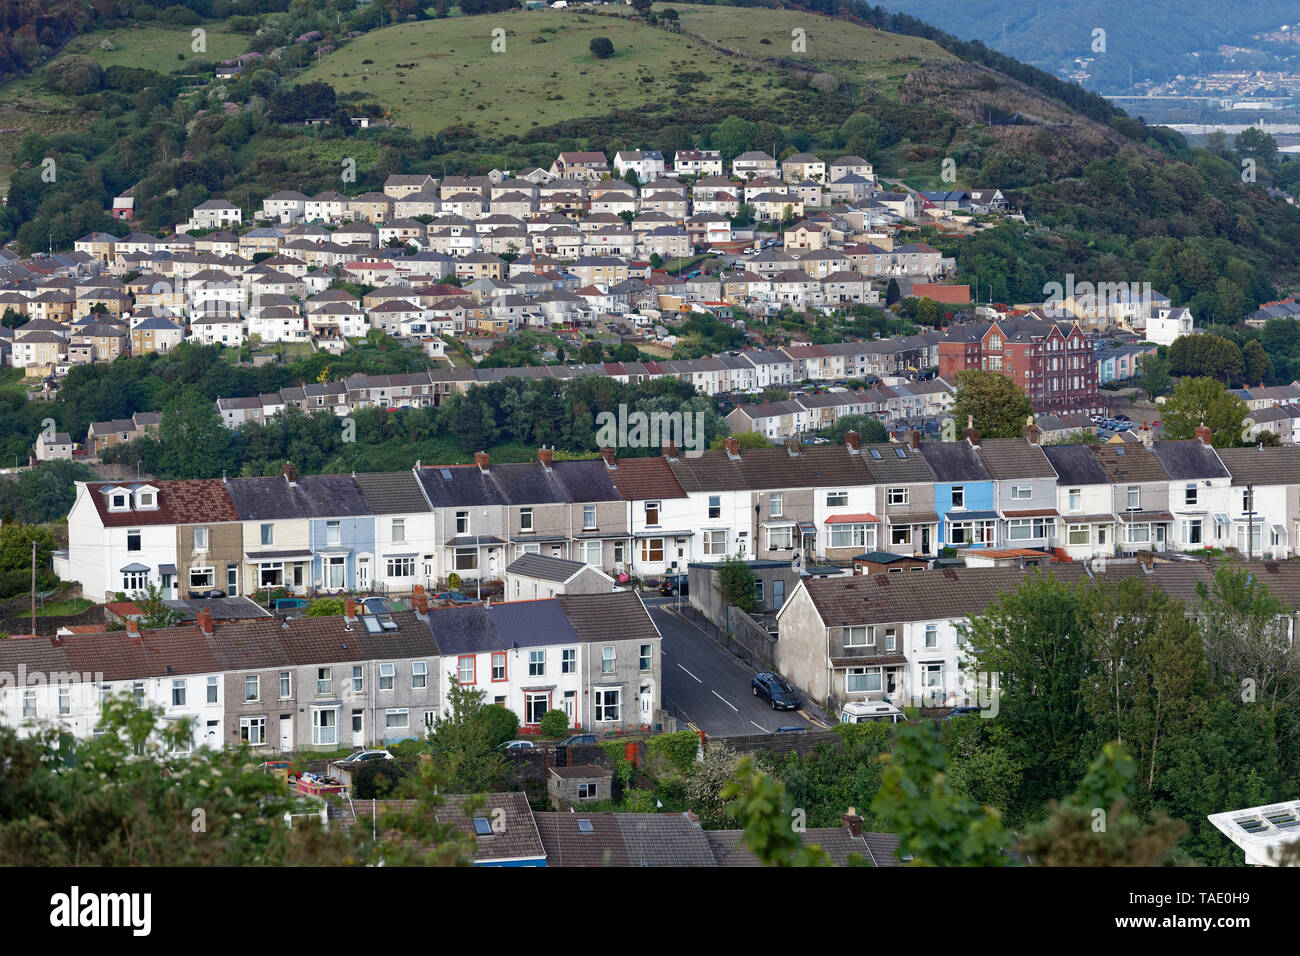 Pictured: Mount Pleasant area and Saint Thomas in the background. Wednesday 22 May 2019 Re: General view of Swansea, Wales, UK Stock Photo